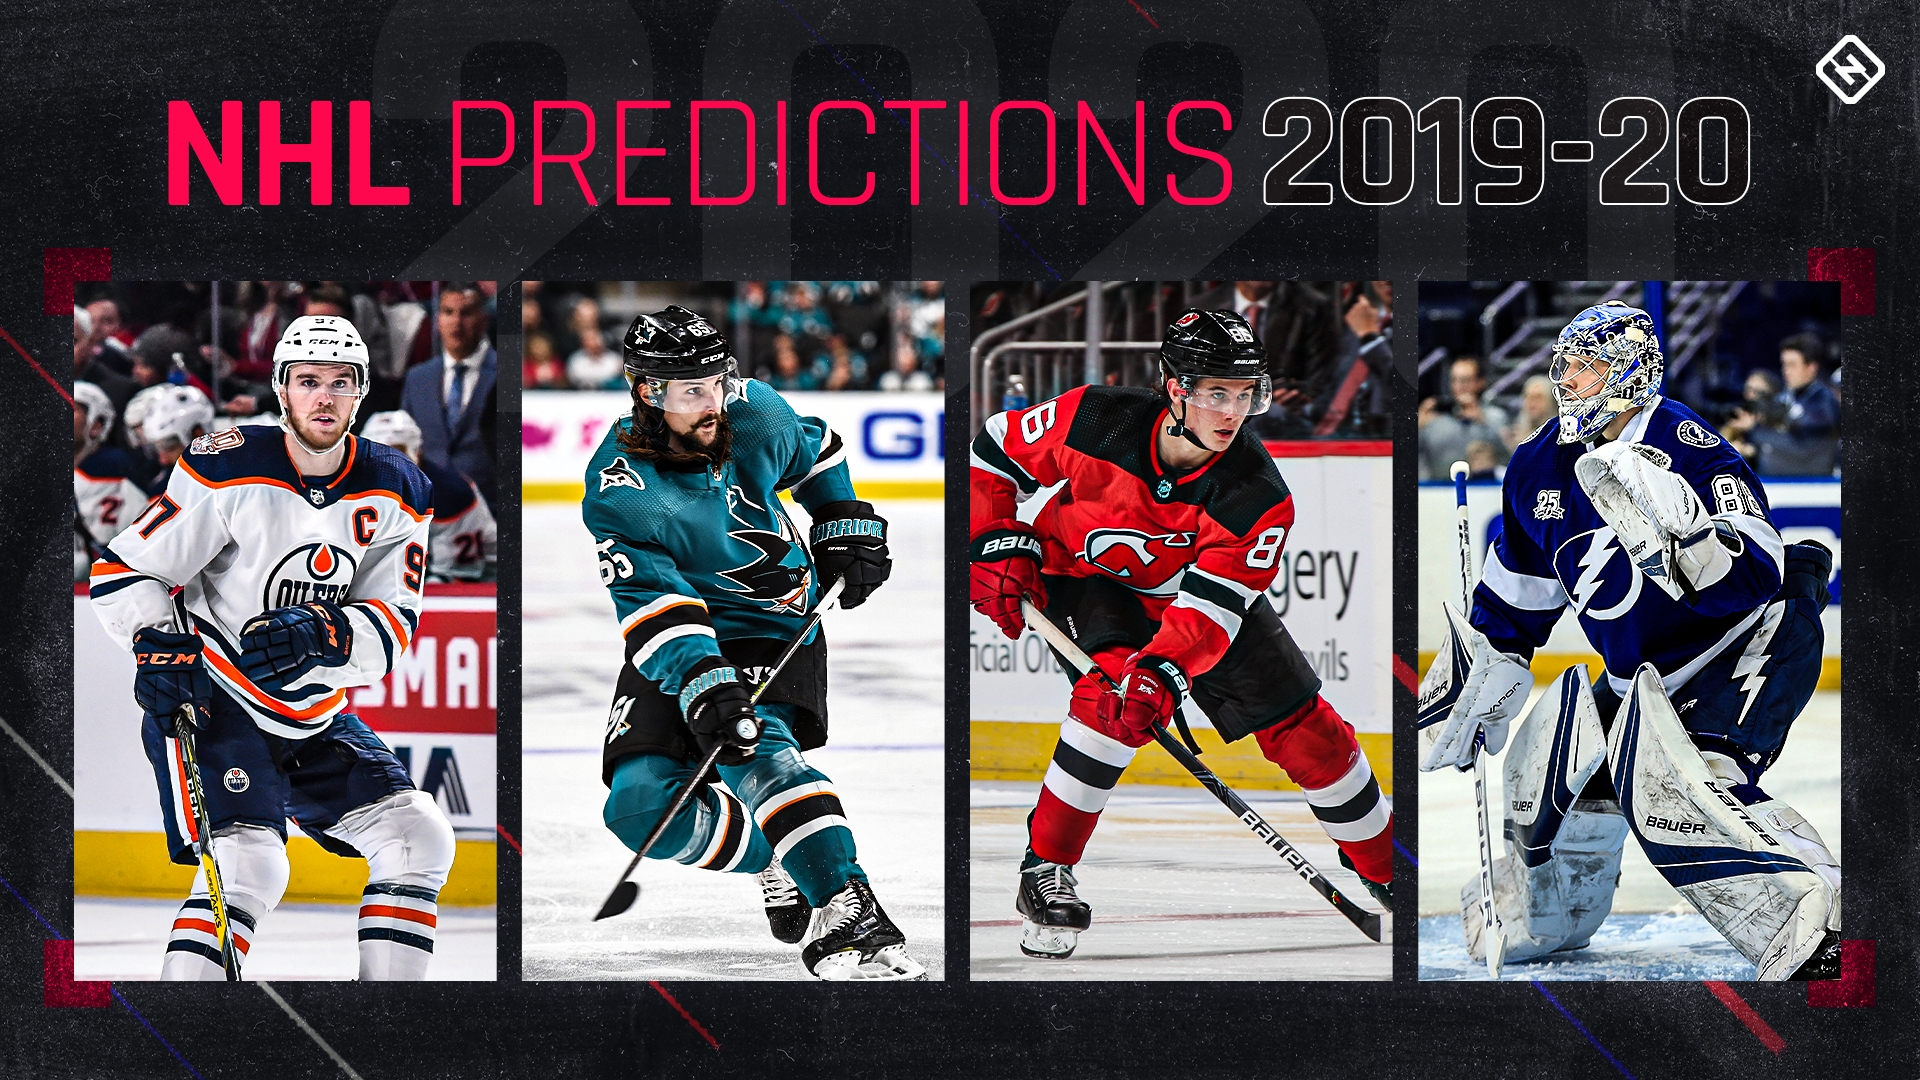 NHL predictions 201920 Final standings, playoff projections, Stanley